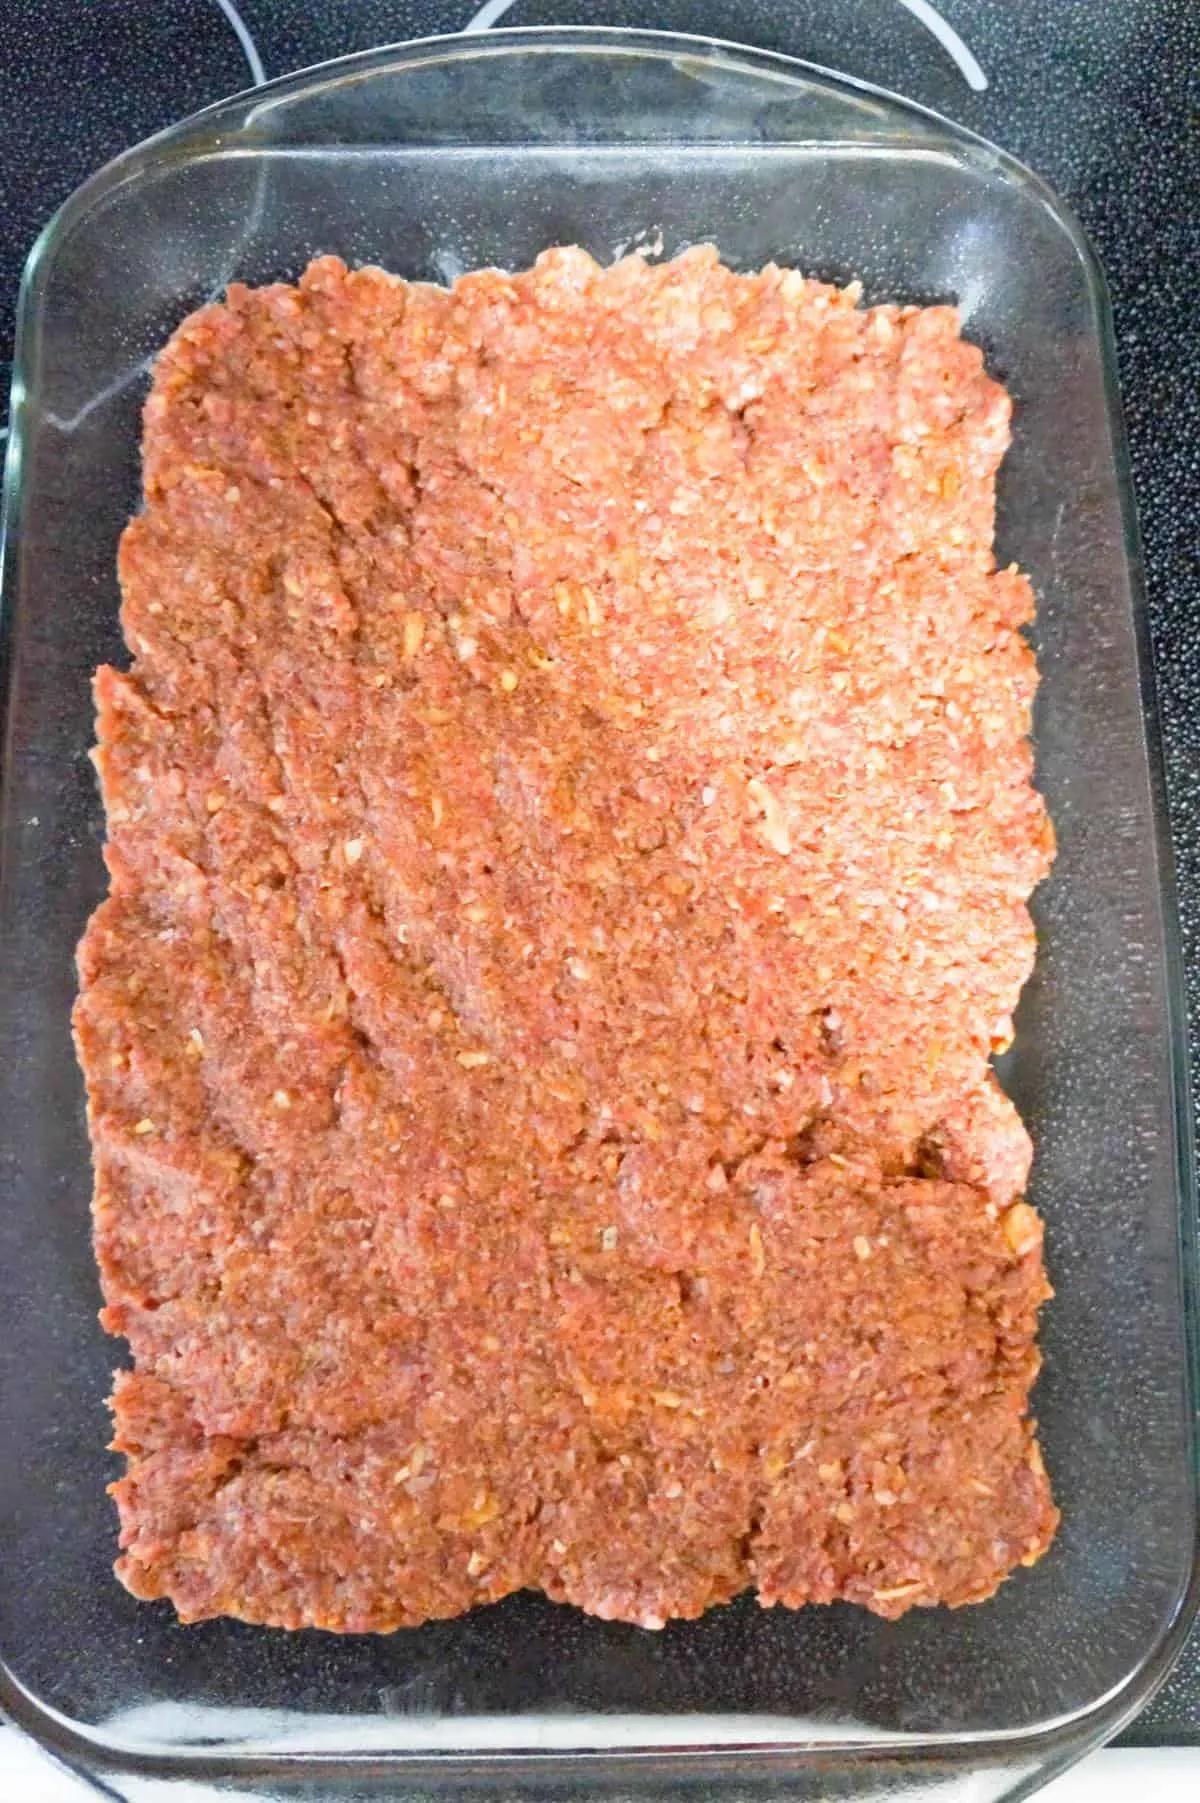 meatloaf mixture in a baking dish